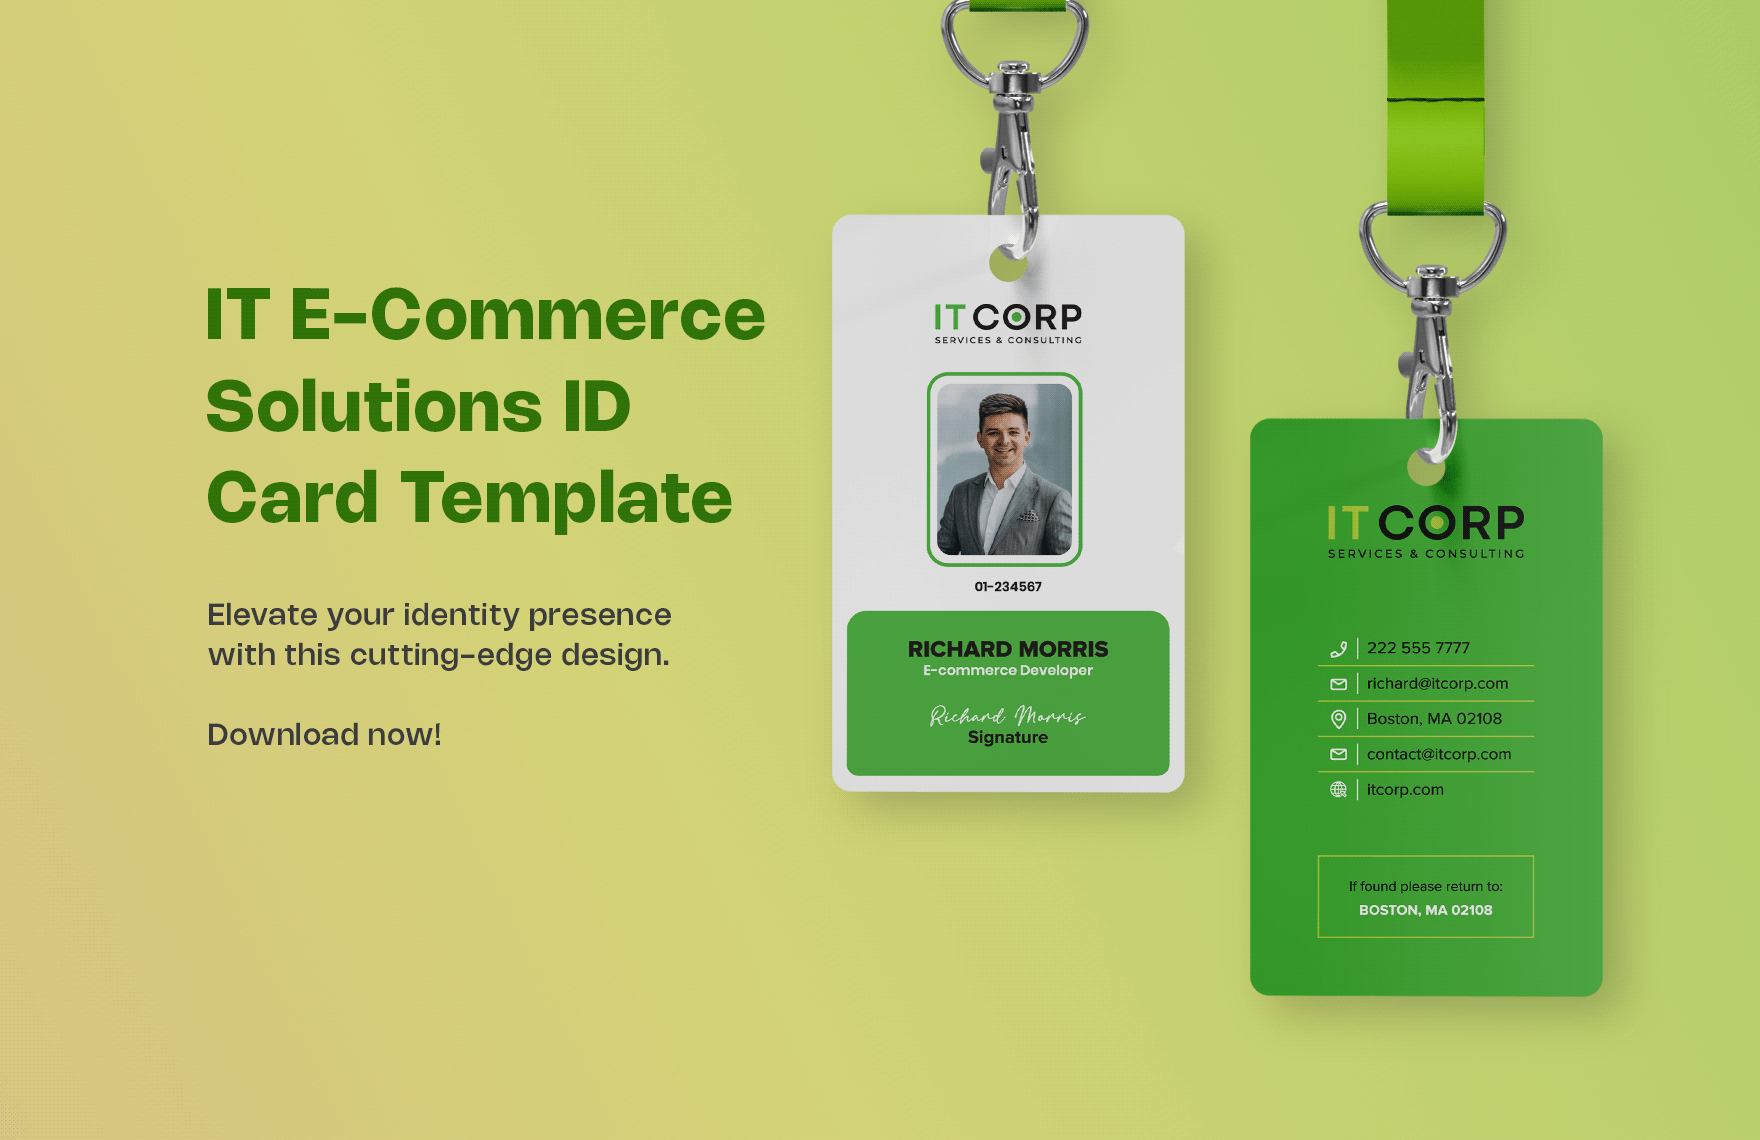 IT E-Commerce Solutions ID Card Template in Word, Illustrator, PSD